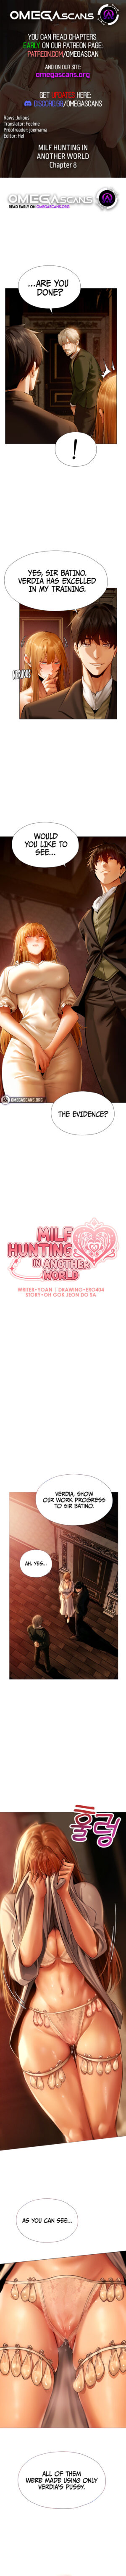 [ERO404 & Yoan & Oh gok Jeon do sa] Milf Hunting in Another World (1-25) [English] [Omega Scans] [Ongoing]